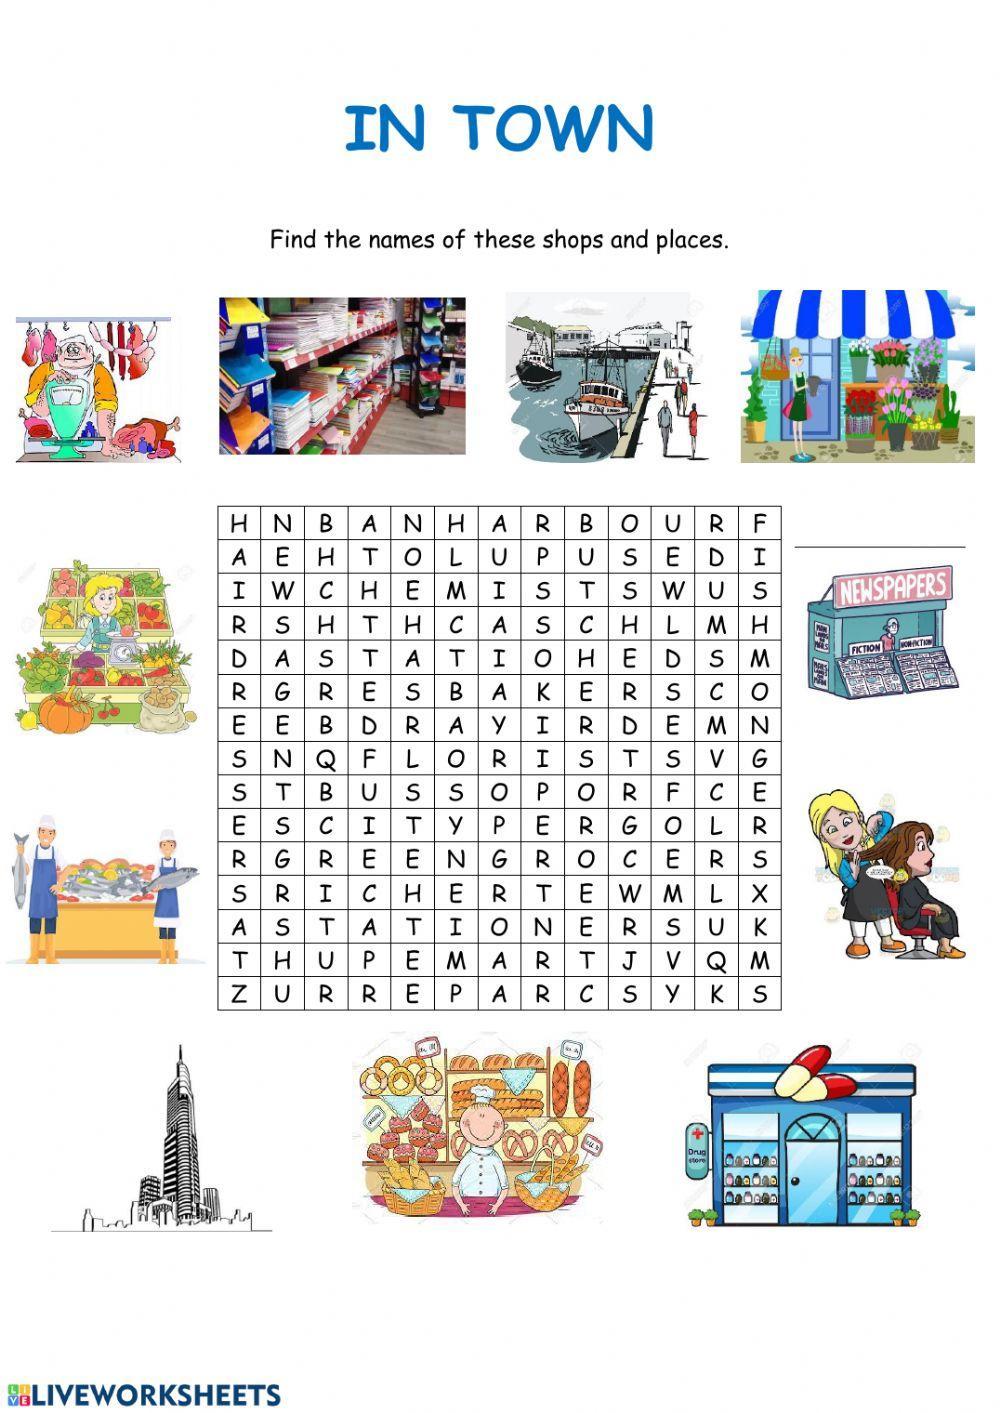 In town - wordsearch puzzle